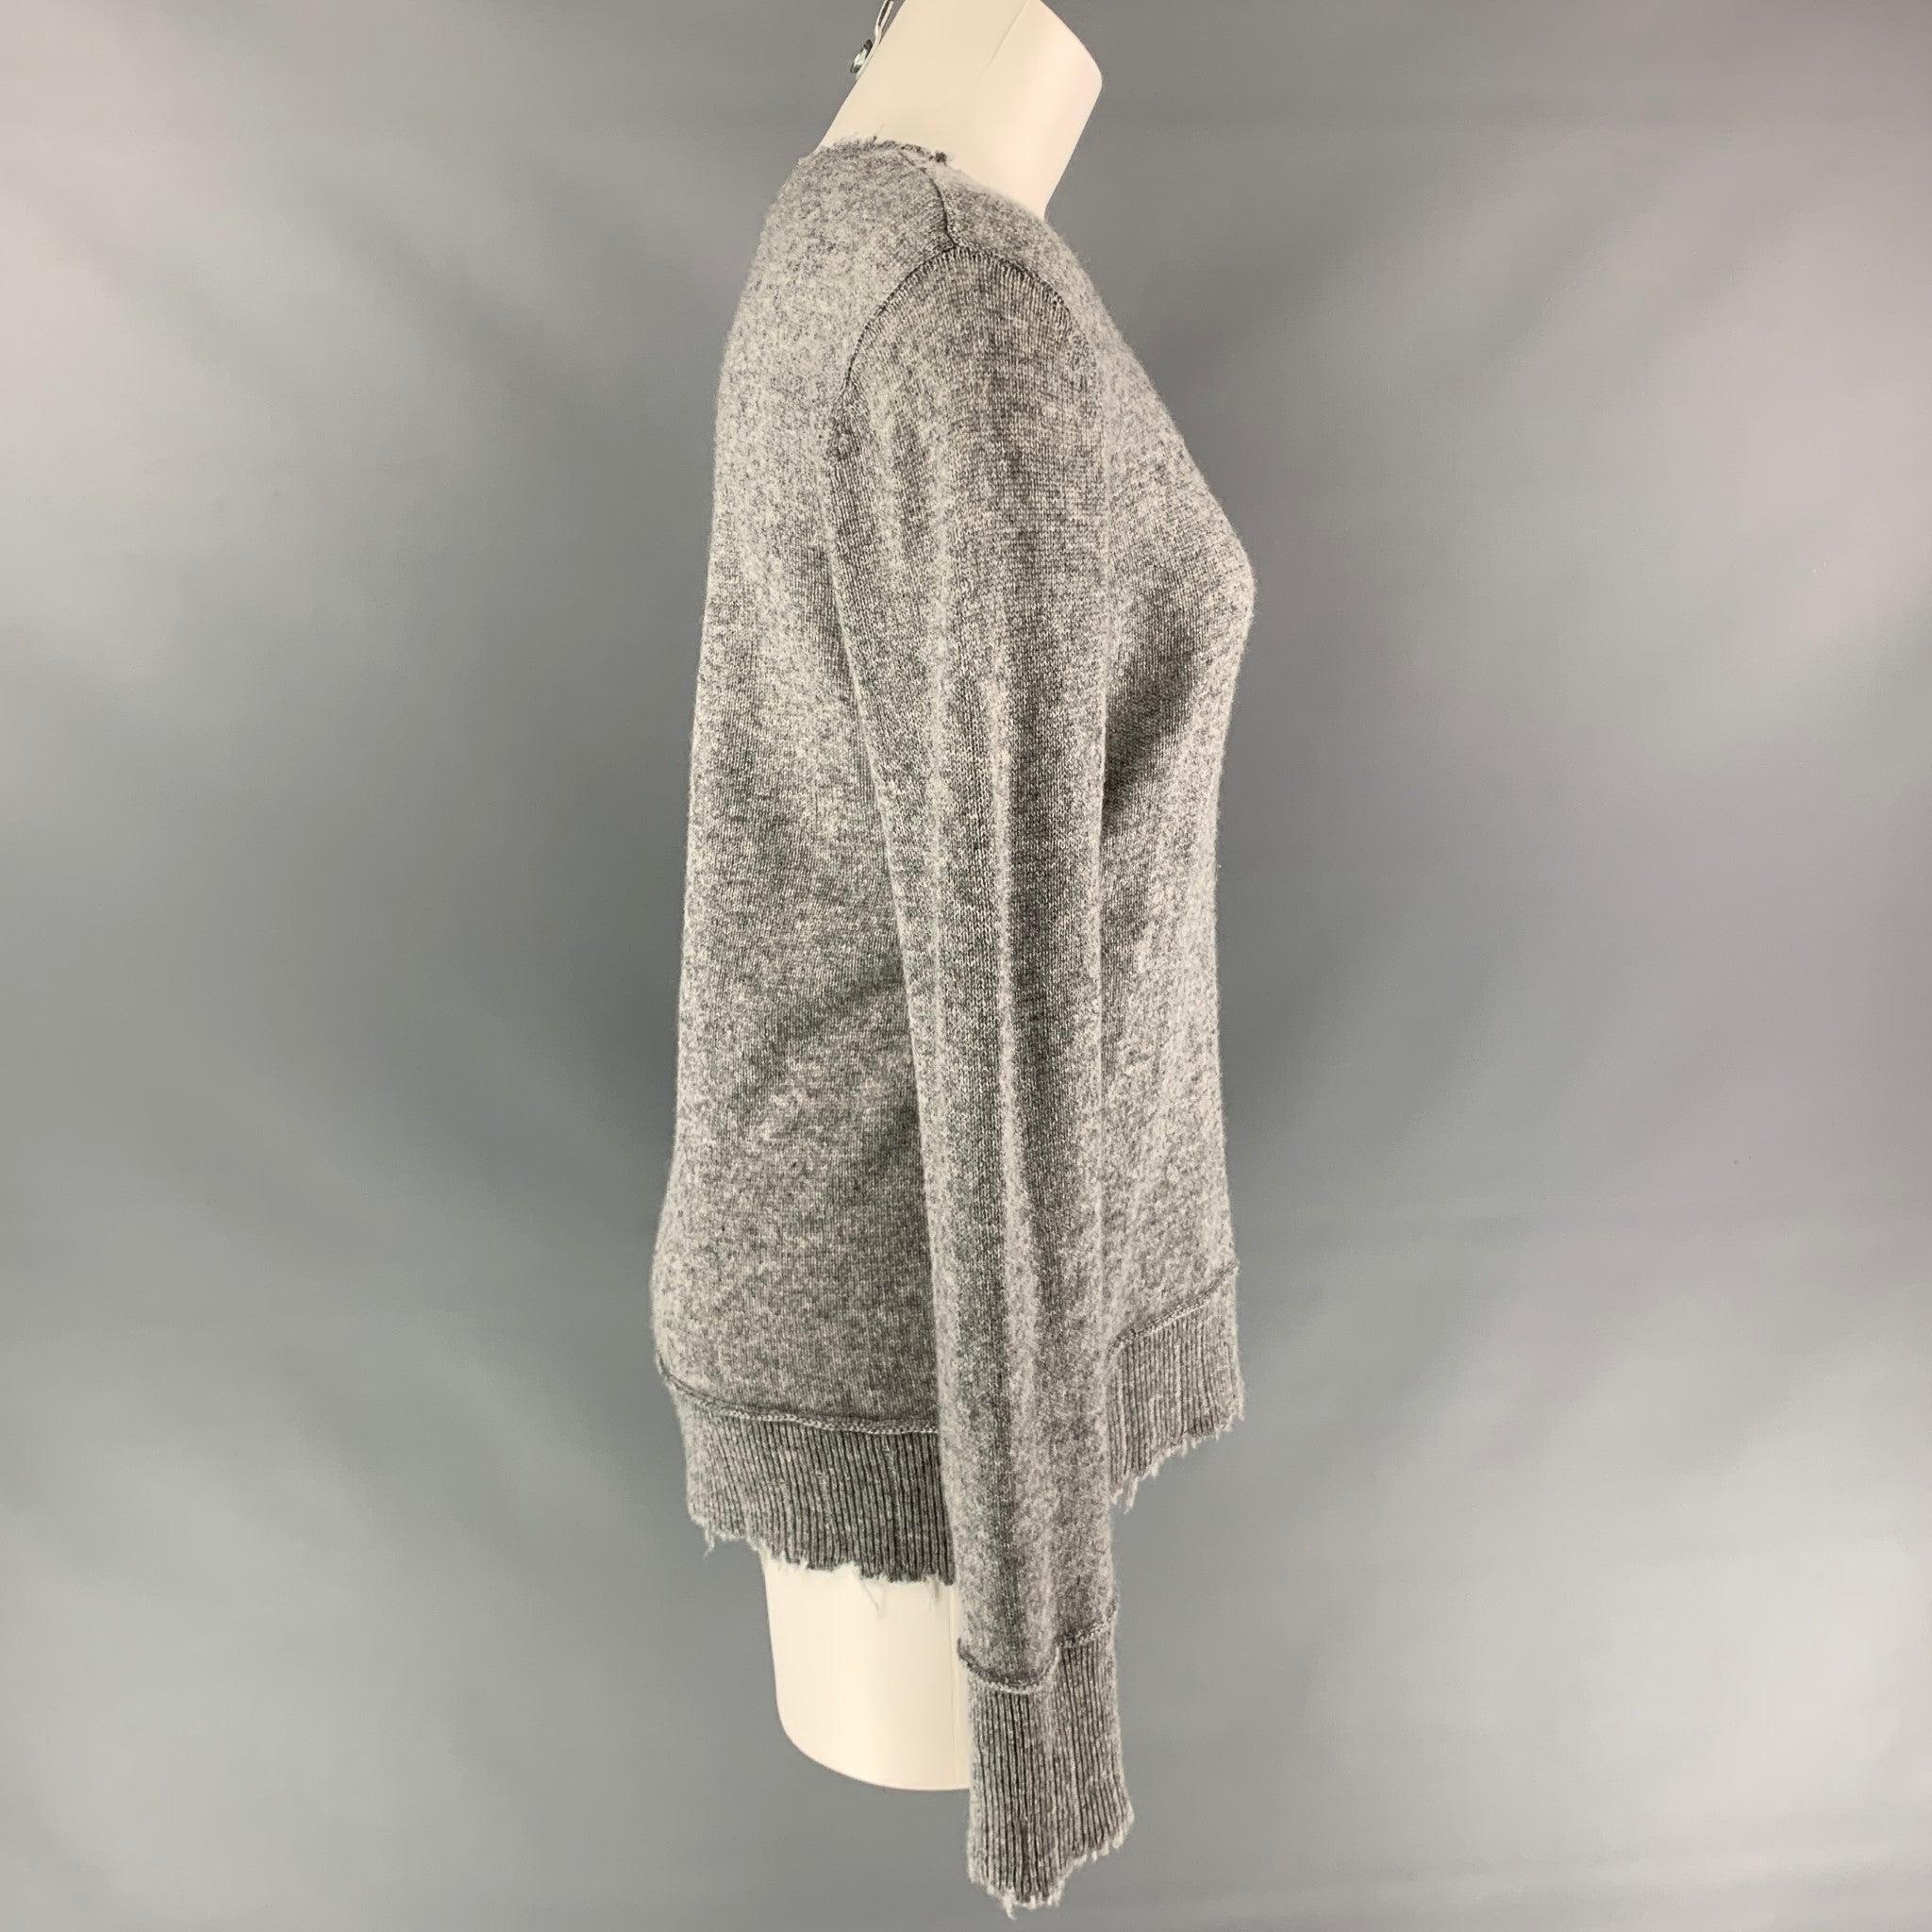 R13 sweater comes in a grey heather cashmere featuring distressed edges and a crew-neck.Very Good Pre-Owned Condition. 

Marked:   S 

Measurements: 
 
Shoulder: 17 inches  Bust: 40 inches  Sleeve: 28.5 inches  Length: 26 inches  
  
  
 
Reference: